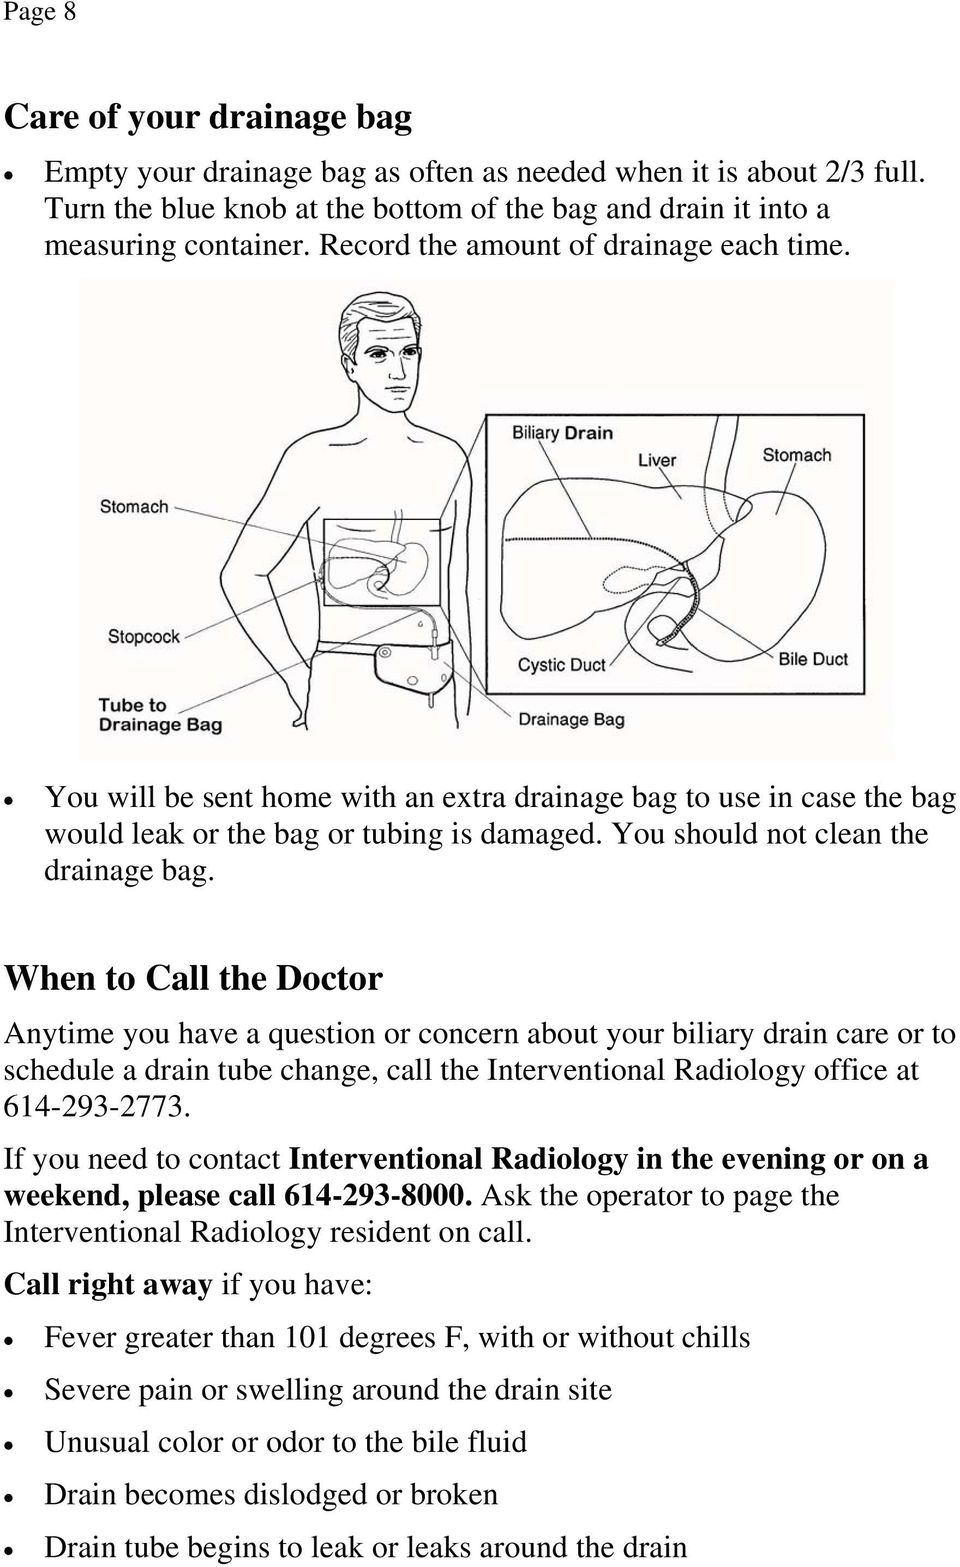 When to Call the Doctor Anytime you have a question or concern about your biliary drain care or to schedule a drain tube change, call the Interventional Radiology office at 614-293-2773.